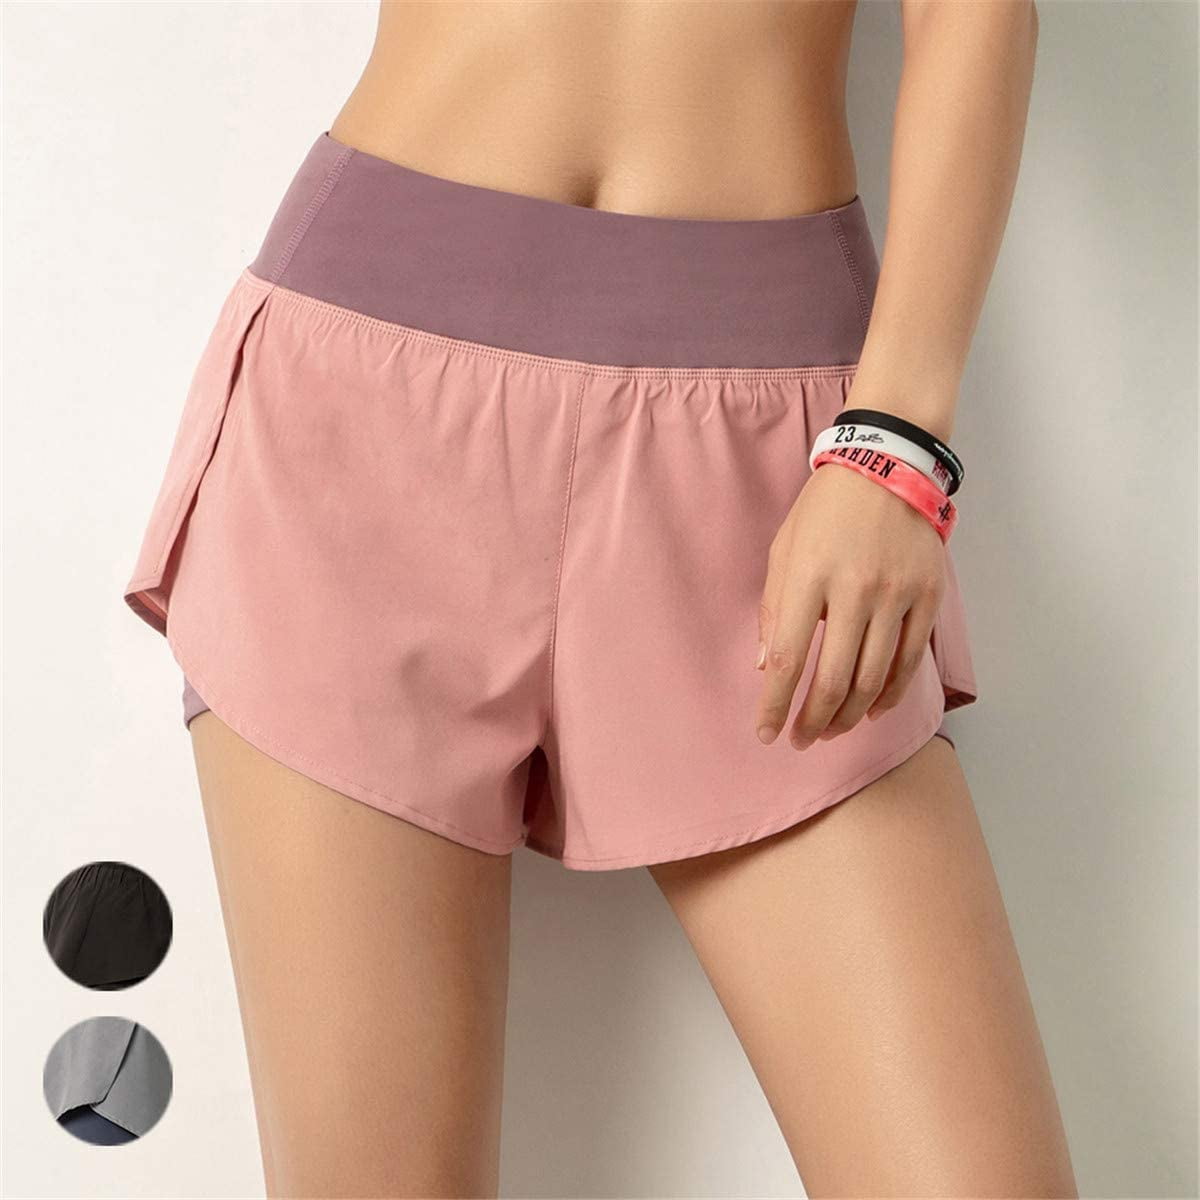 Womens 2 in 1 Yoga Gym Sport Shorts Workout Running Short Pants Quick Dry Athletic  Shorts with Pocket - Walmart.com